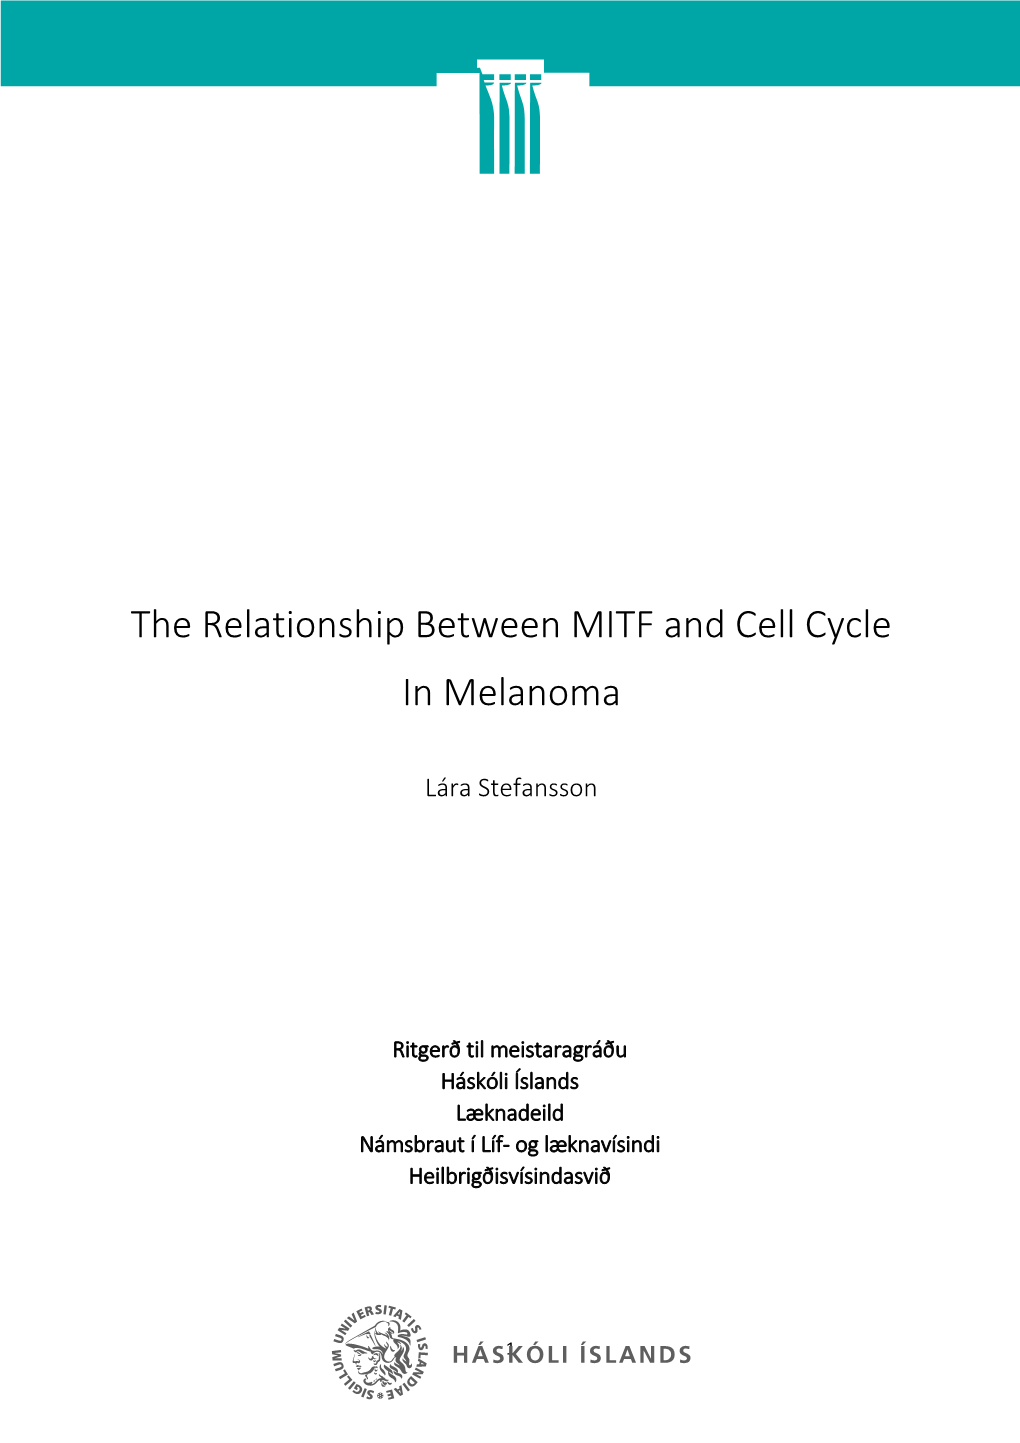 The Relationship Between MITF and Cell Cycle in Melanoma